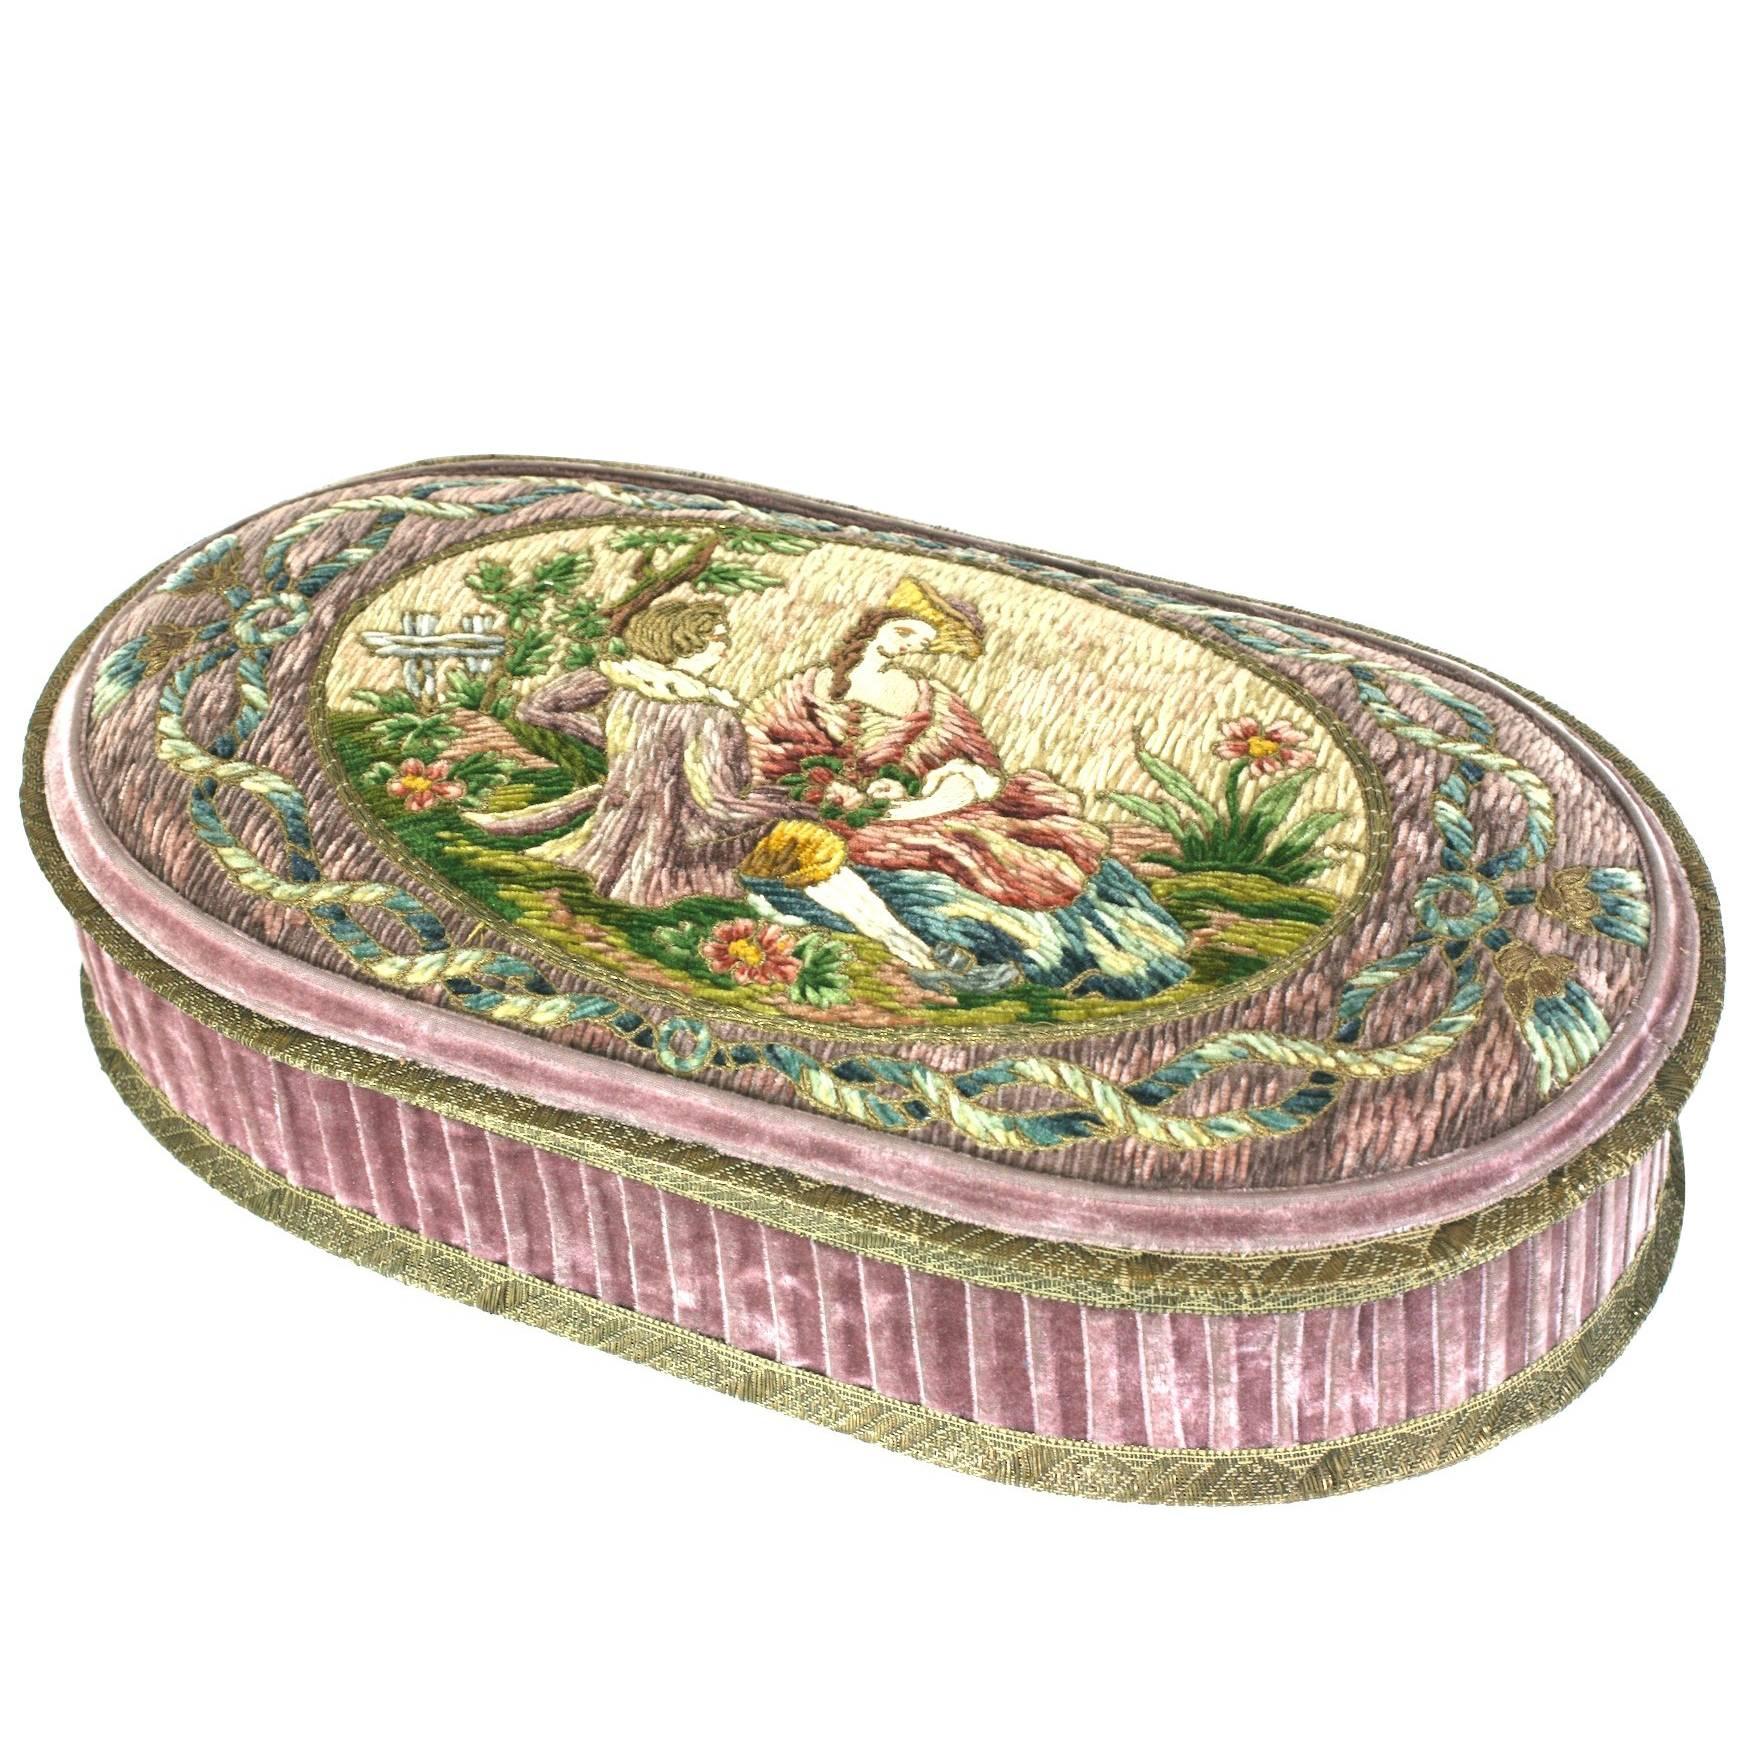 Wonderful  Deco French Boudoir Box with Chenille Embroidery